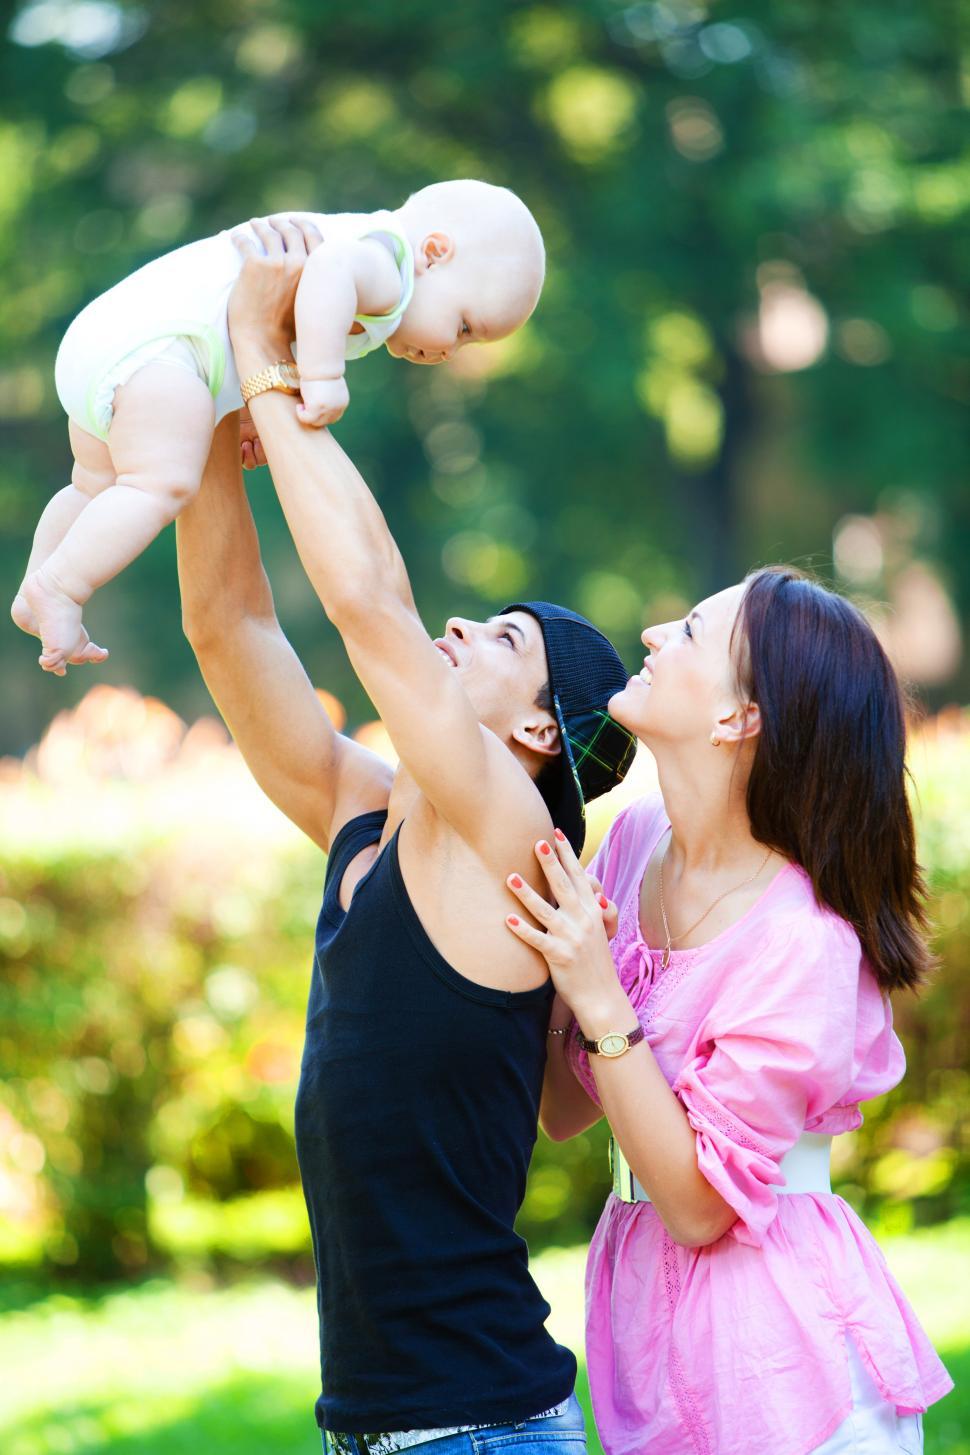 Free Image of Family with a baby relaxing in park at summer day  